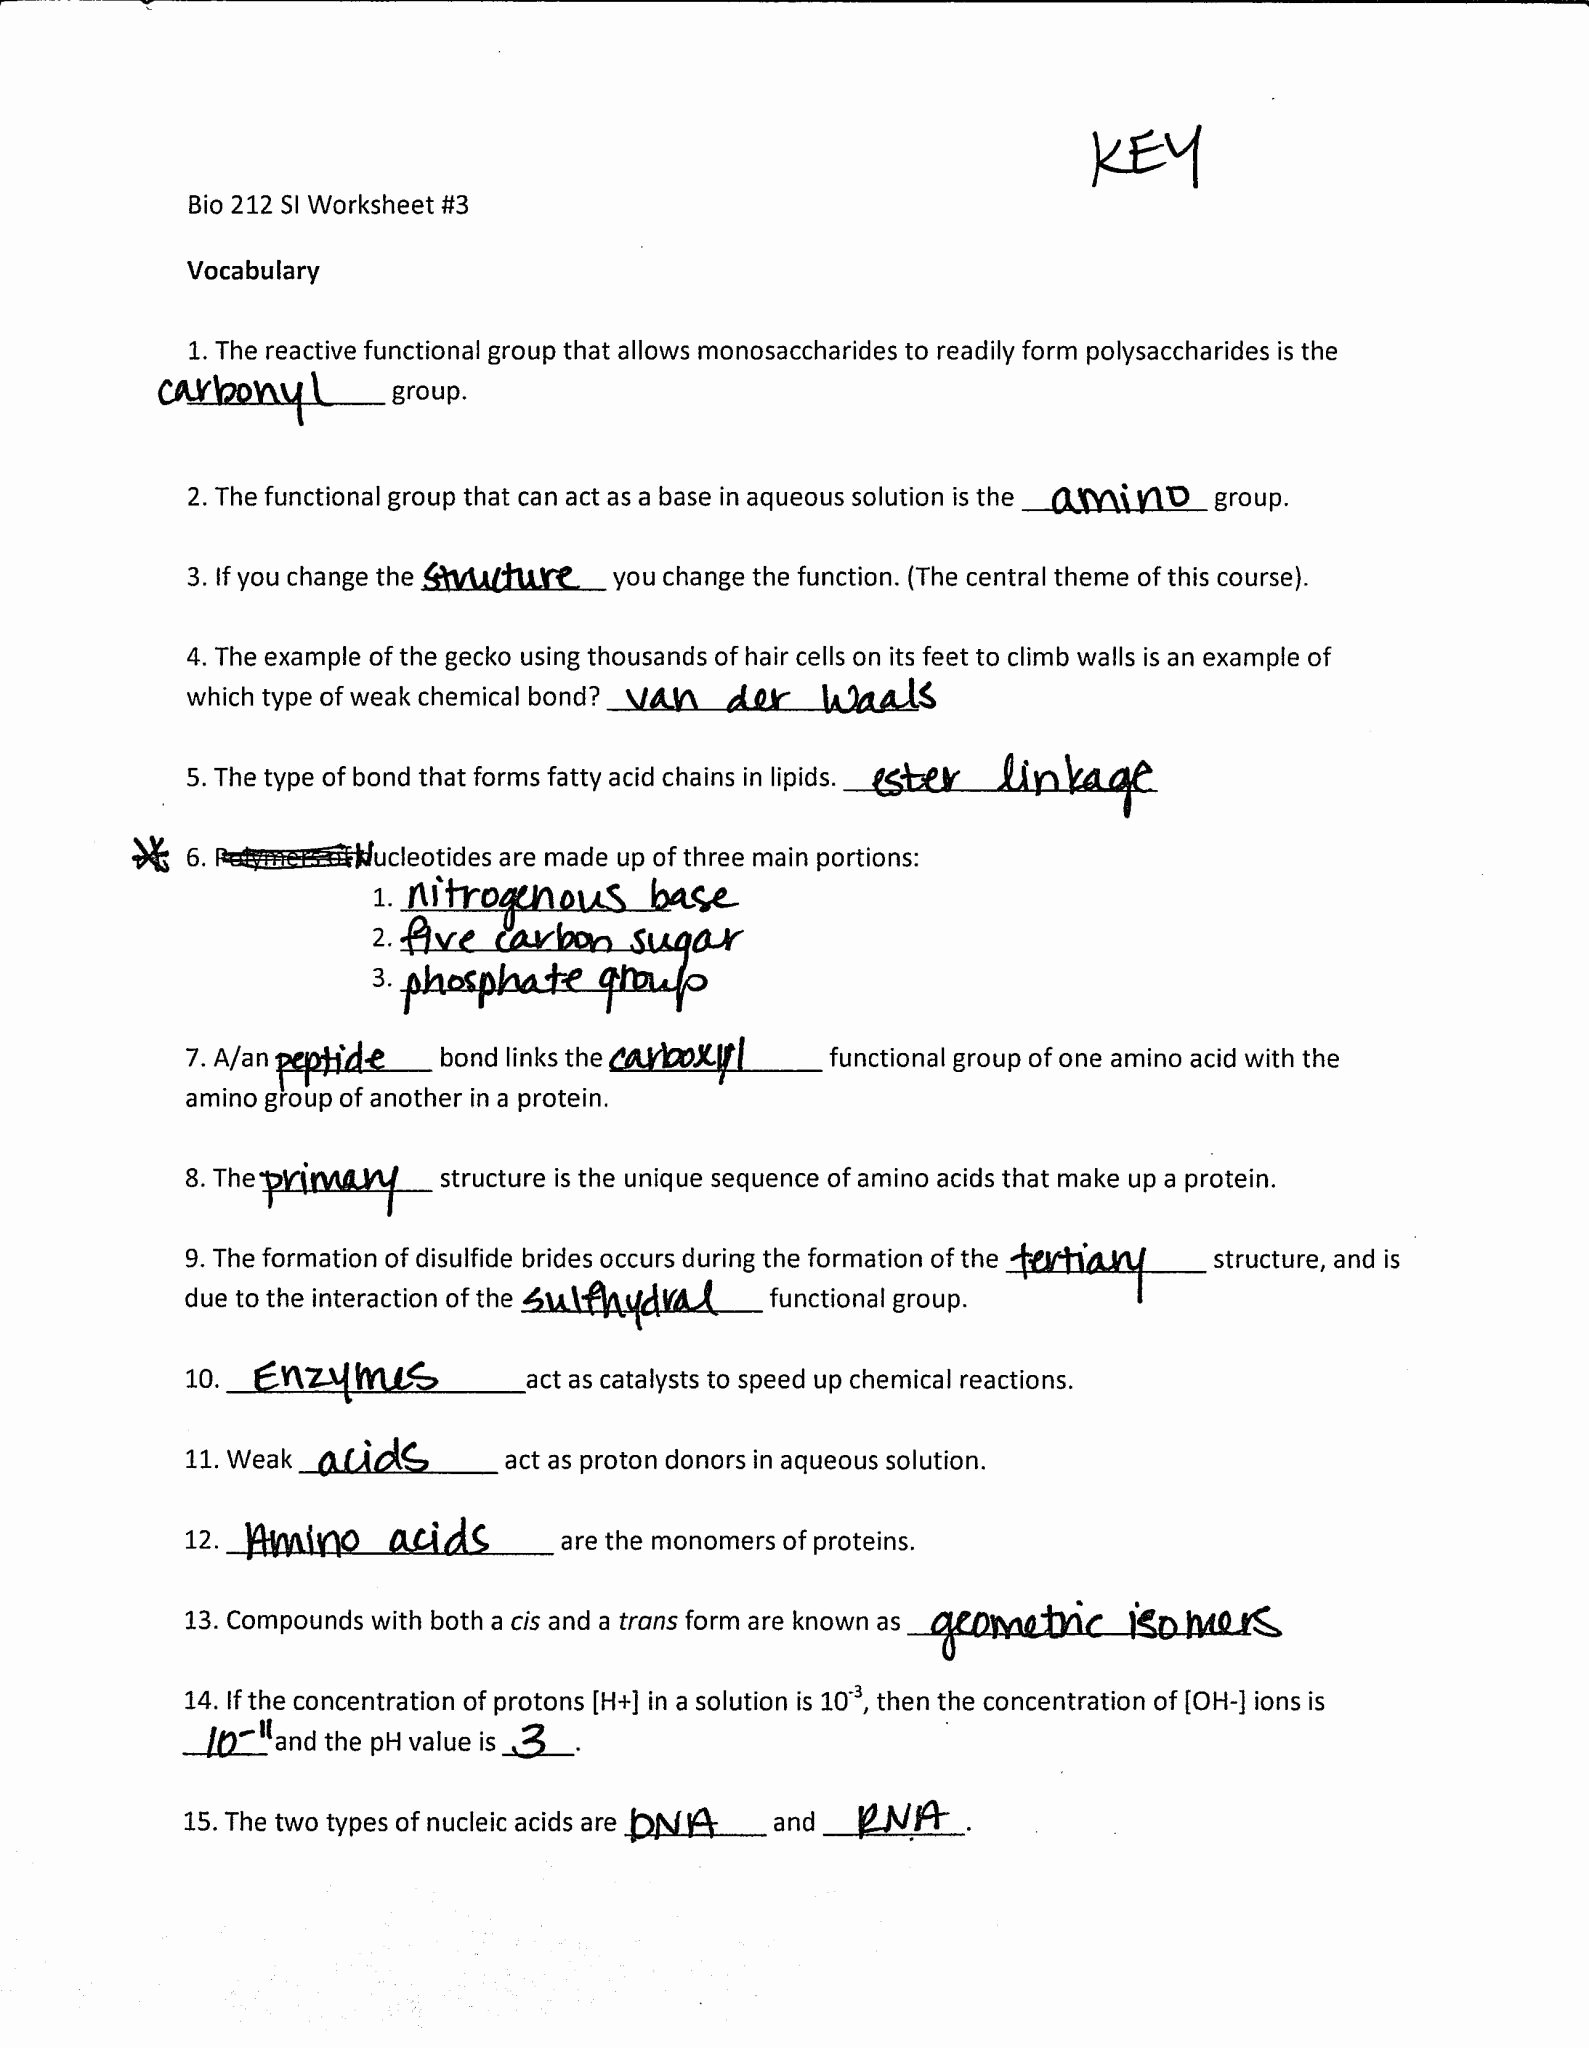 Dna and Replication Worksheet Unique Dna Replication Worksheet Answer Key